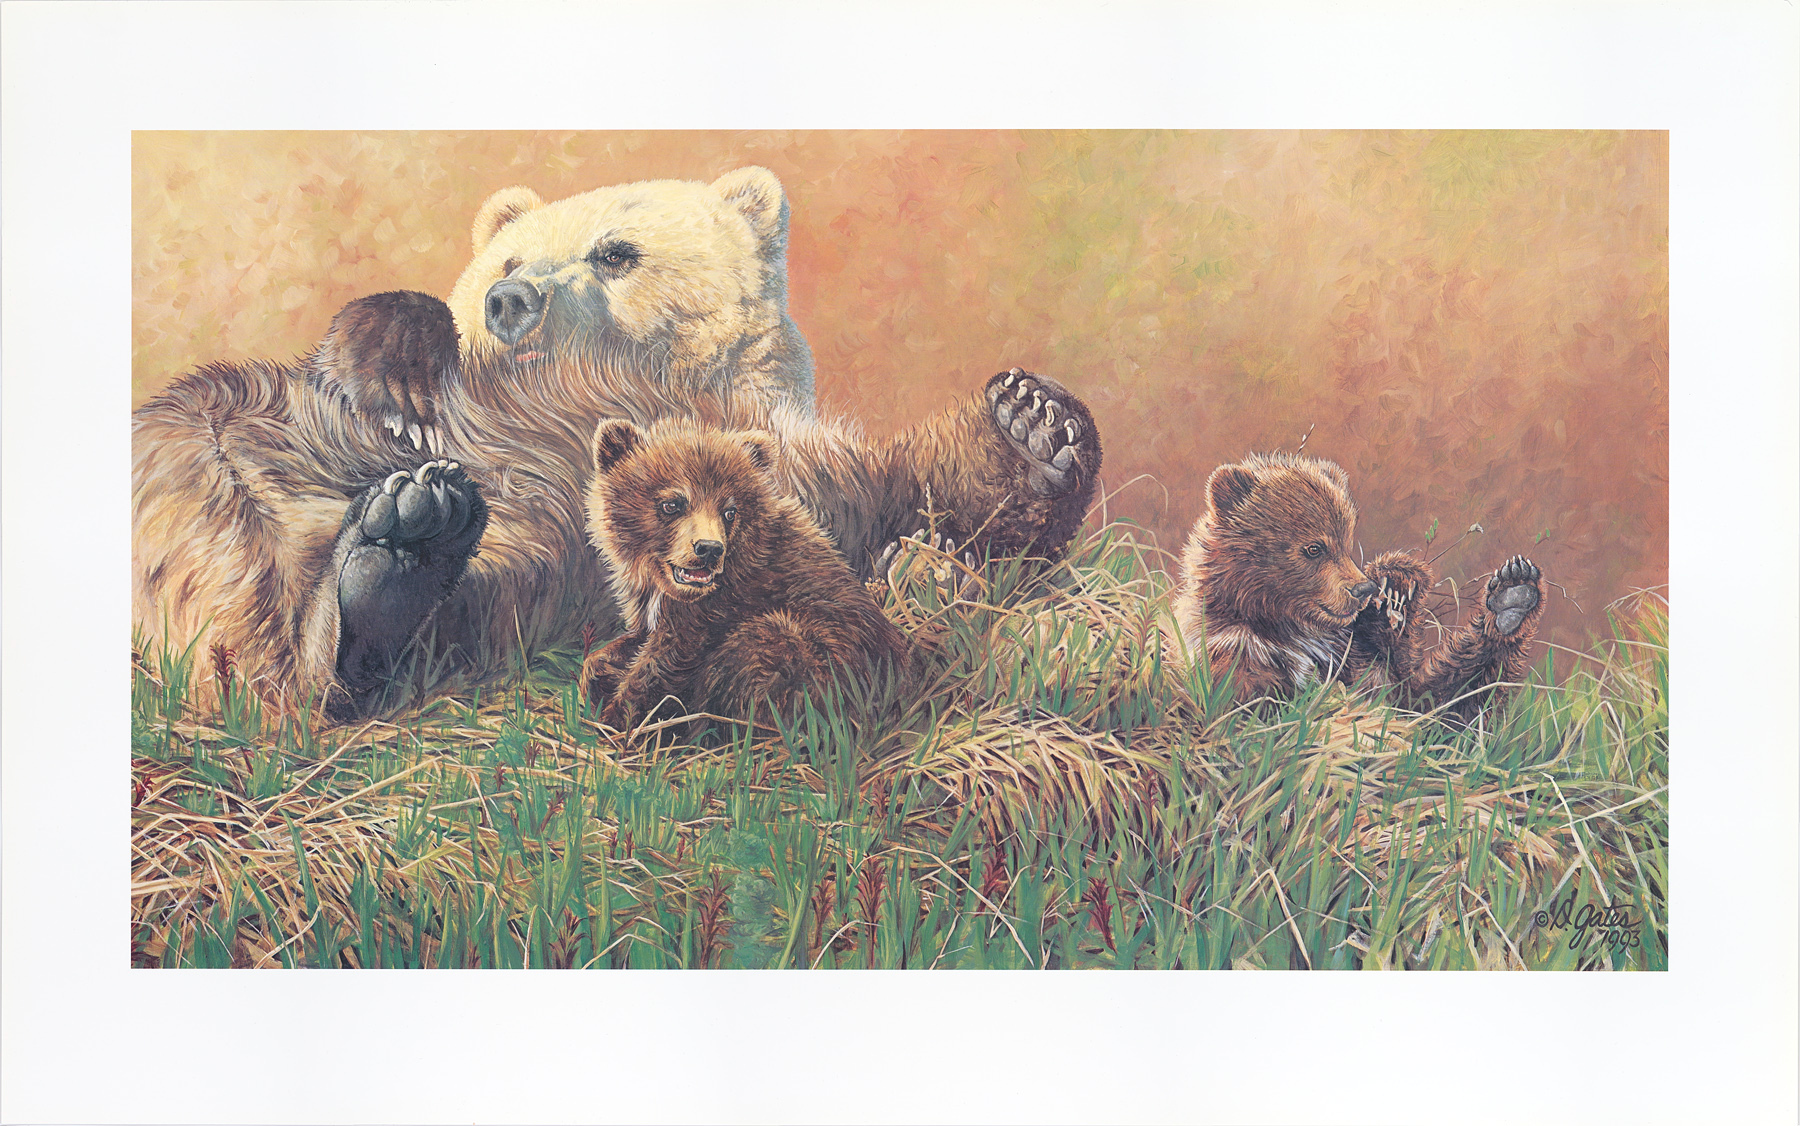 A sow grizzly watches over her carefree cubs